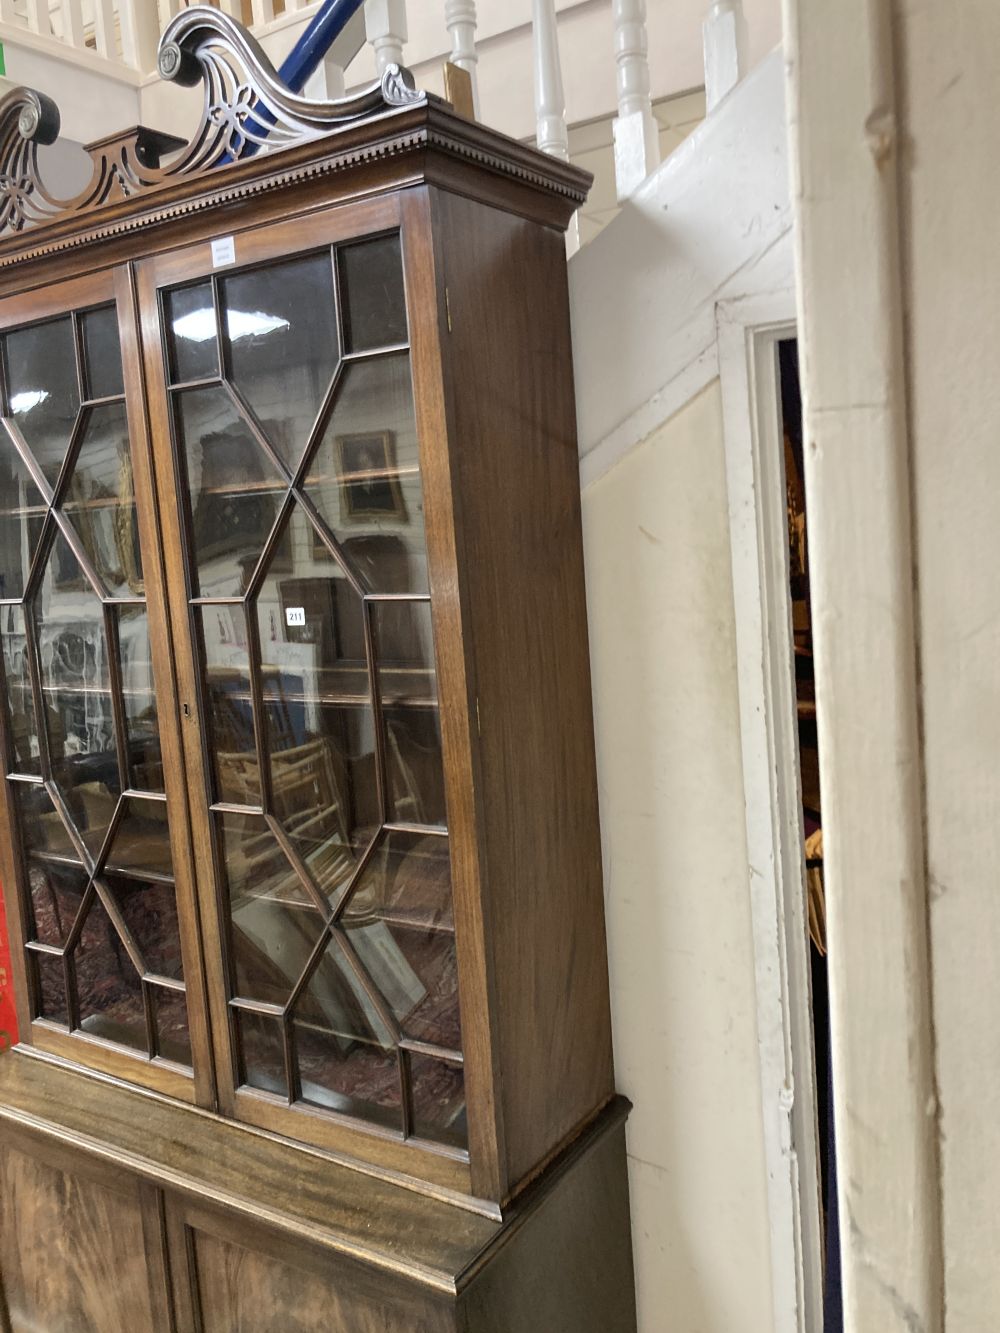 A George III style mahogany two door glass china display cabinet, with two panelled doors beneath, width 110cm depth 47cm height 220cm